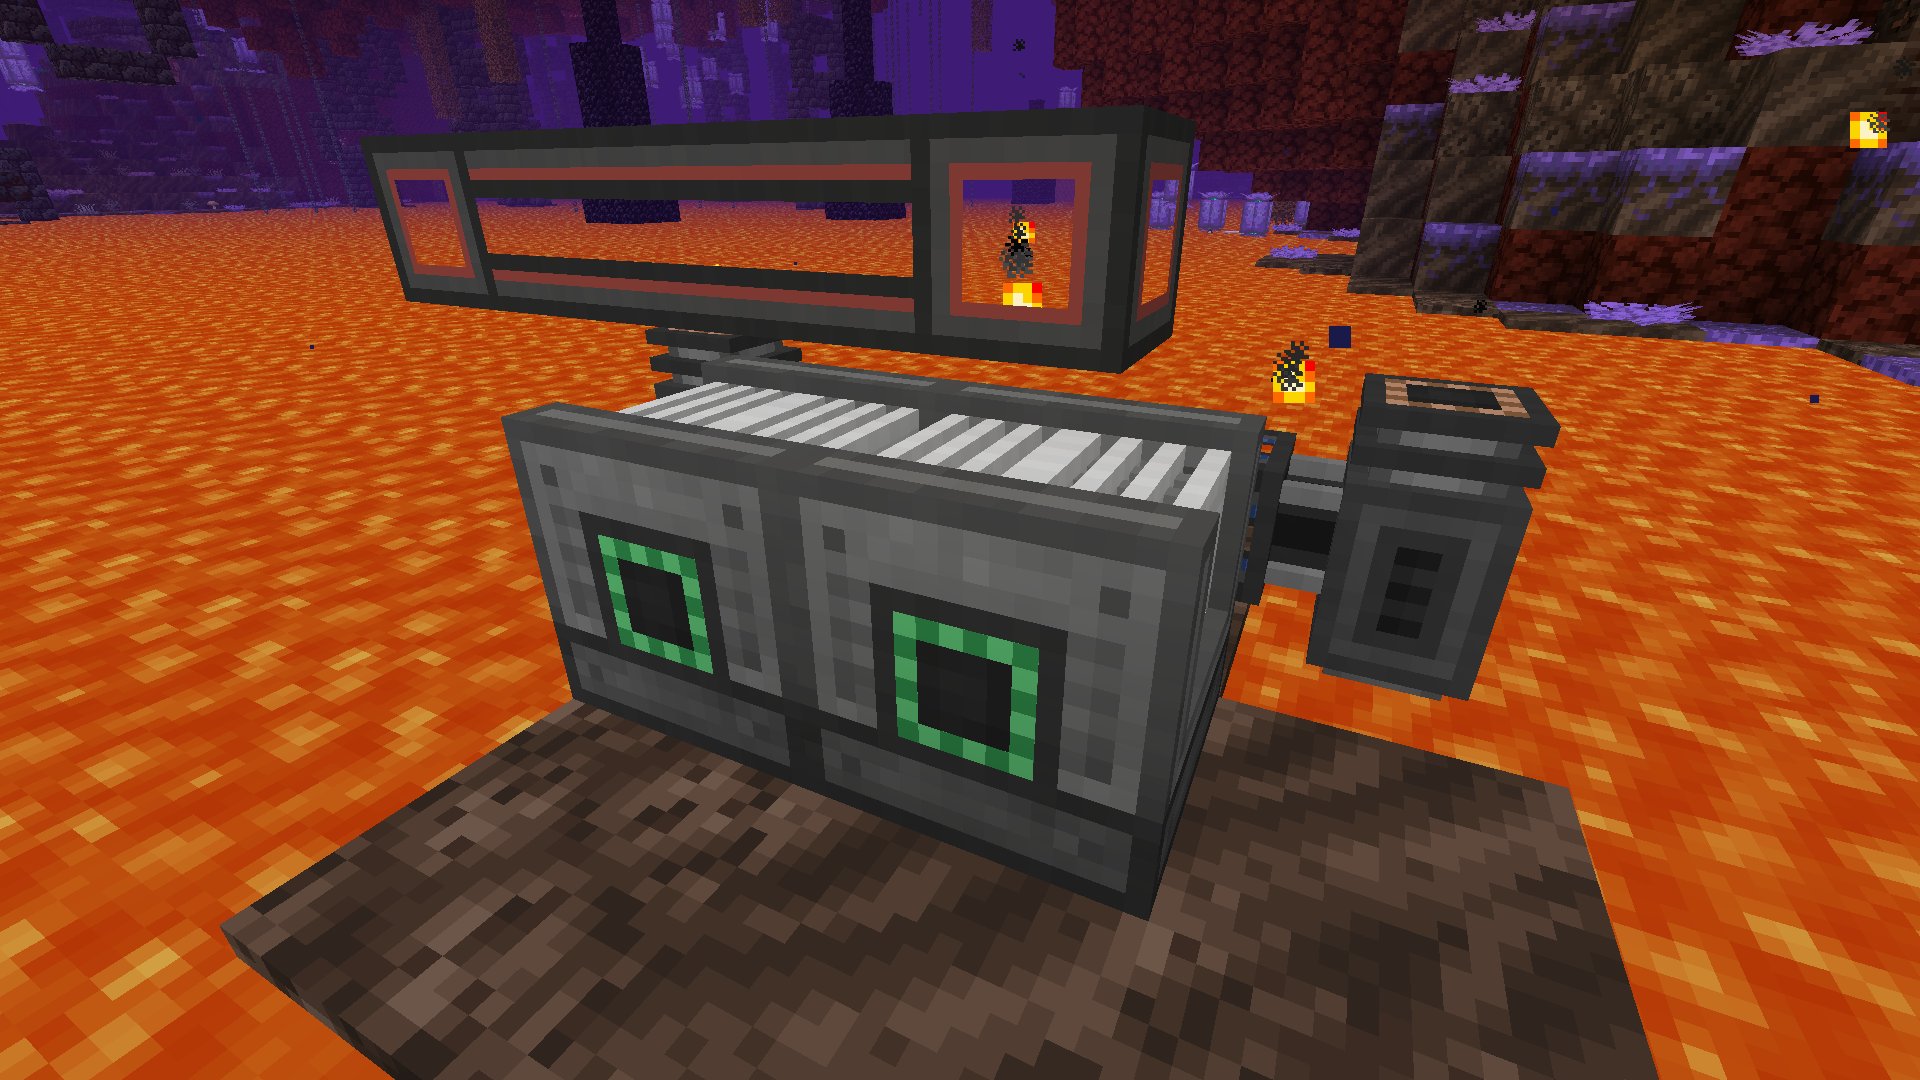 Mel the Charmeleon on Twitter: "I've spent thirty minutes at this and I was confused why this wasn't working, CRAFTED THE WRONG BLOCKS! I meant to craft a Heat Generator, not